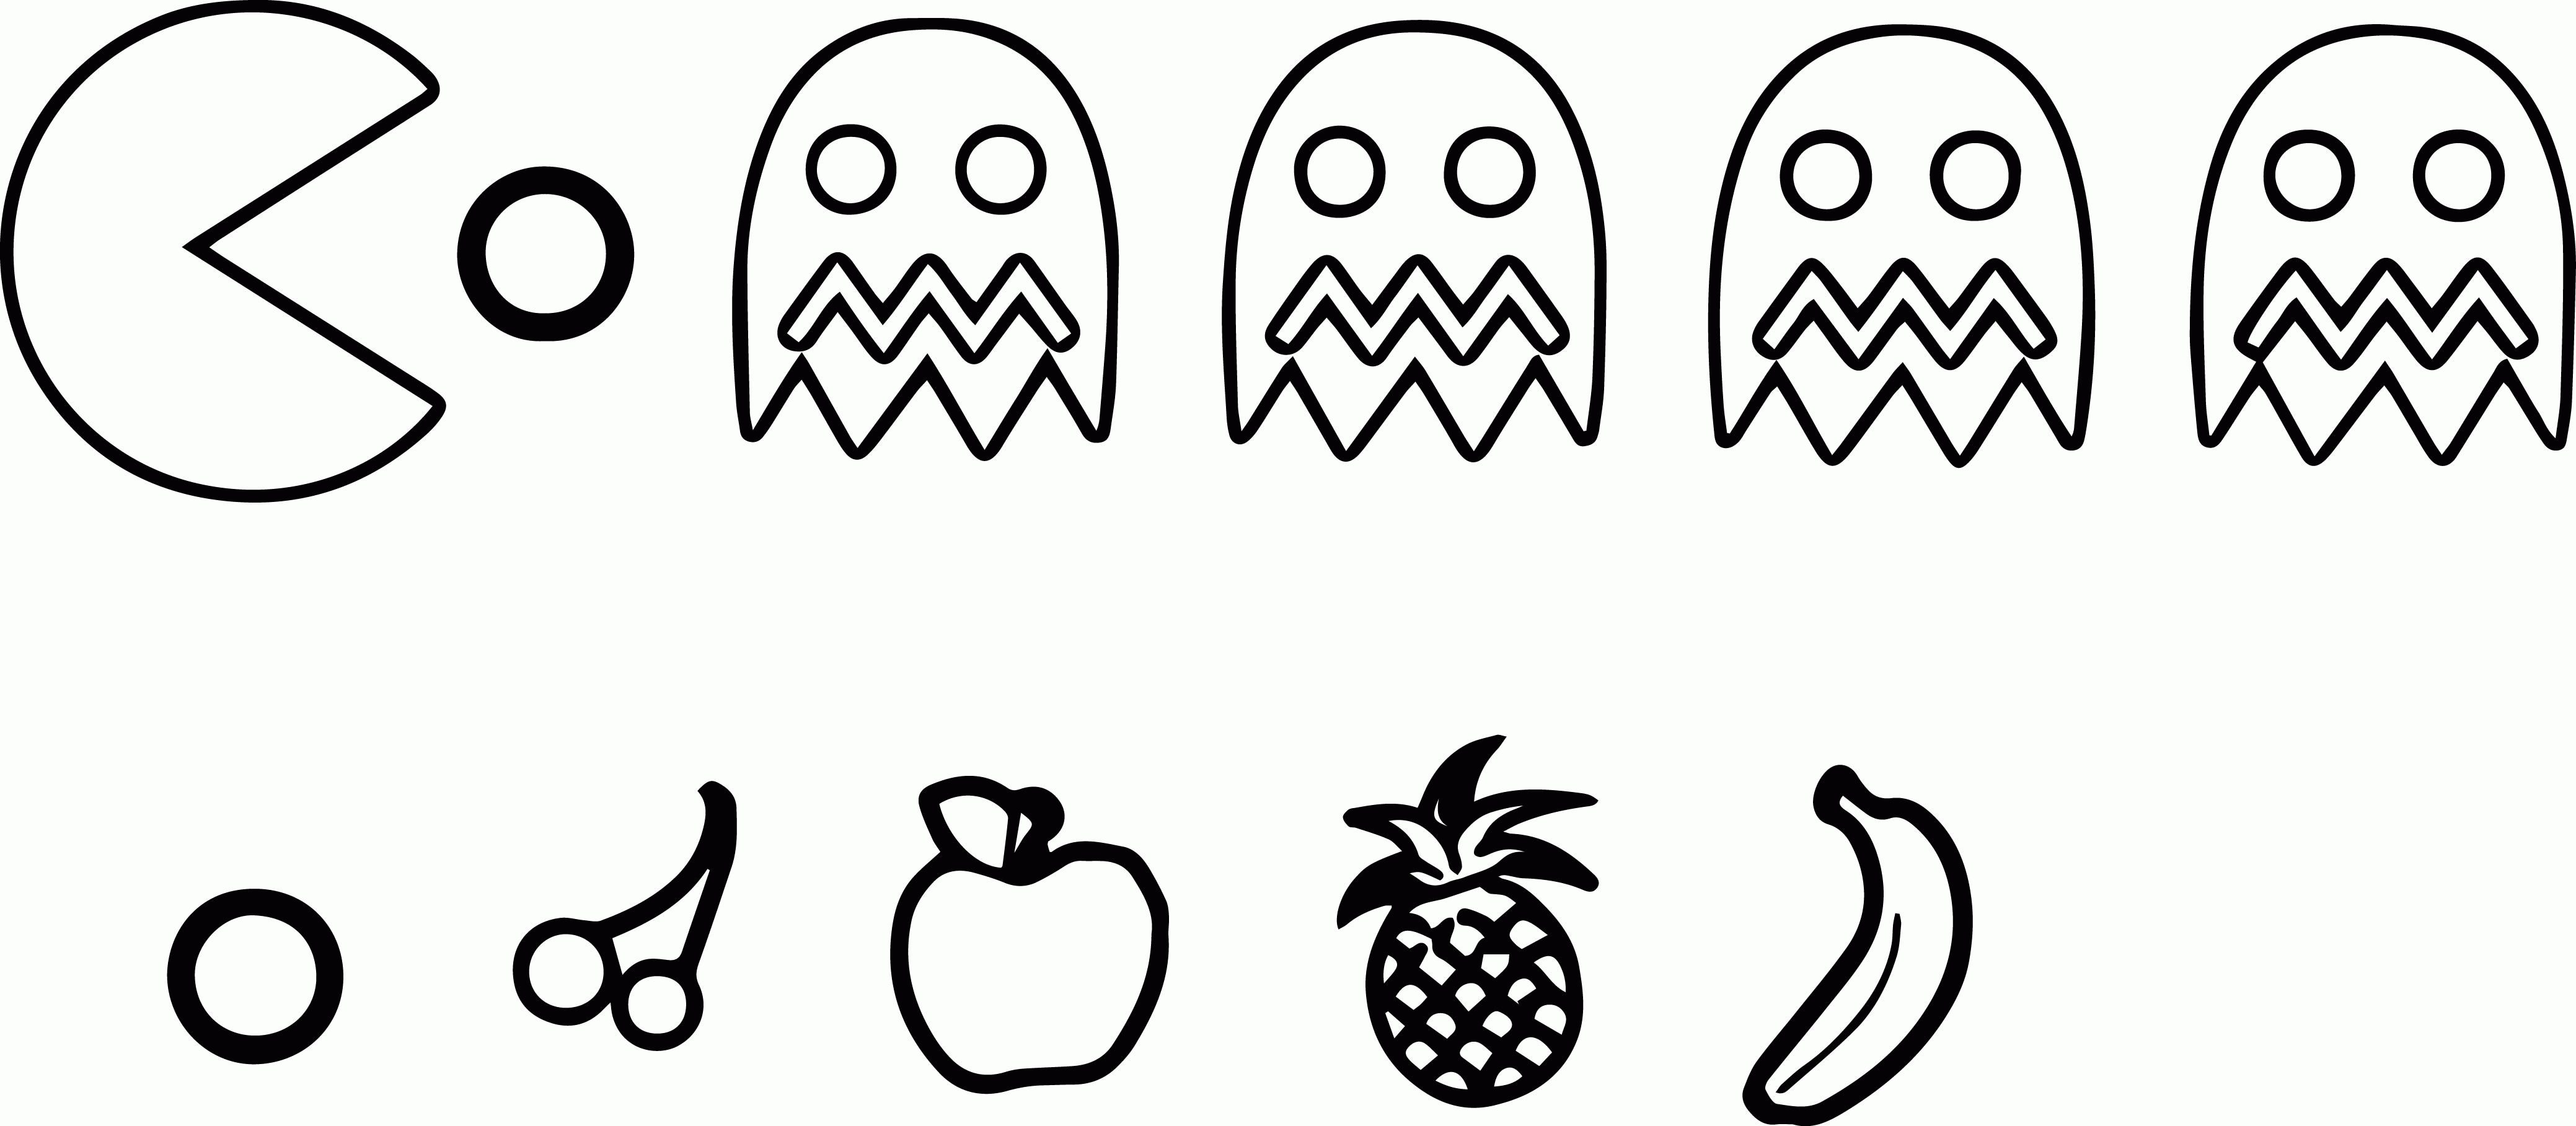 pacman coloring page - High Quality Coloring Pages